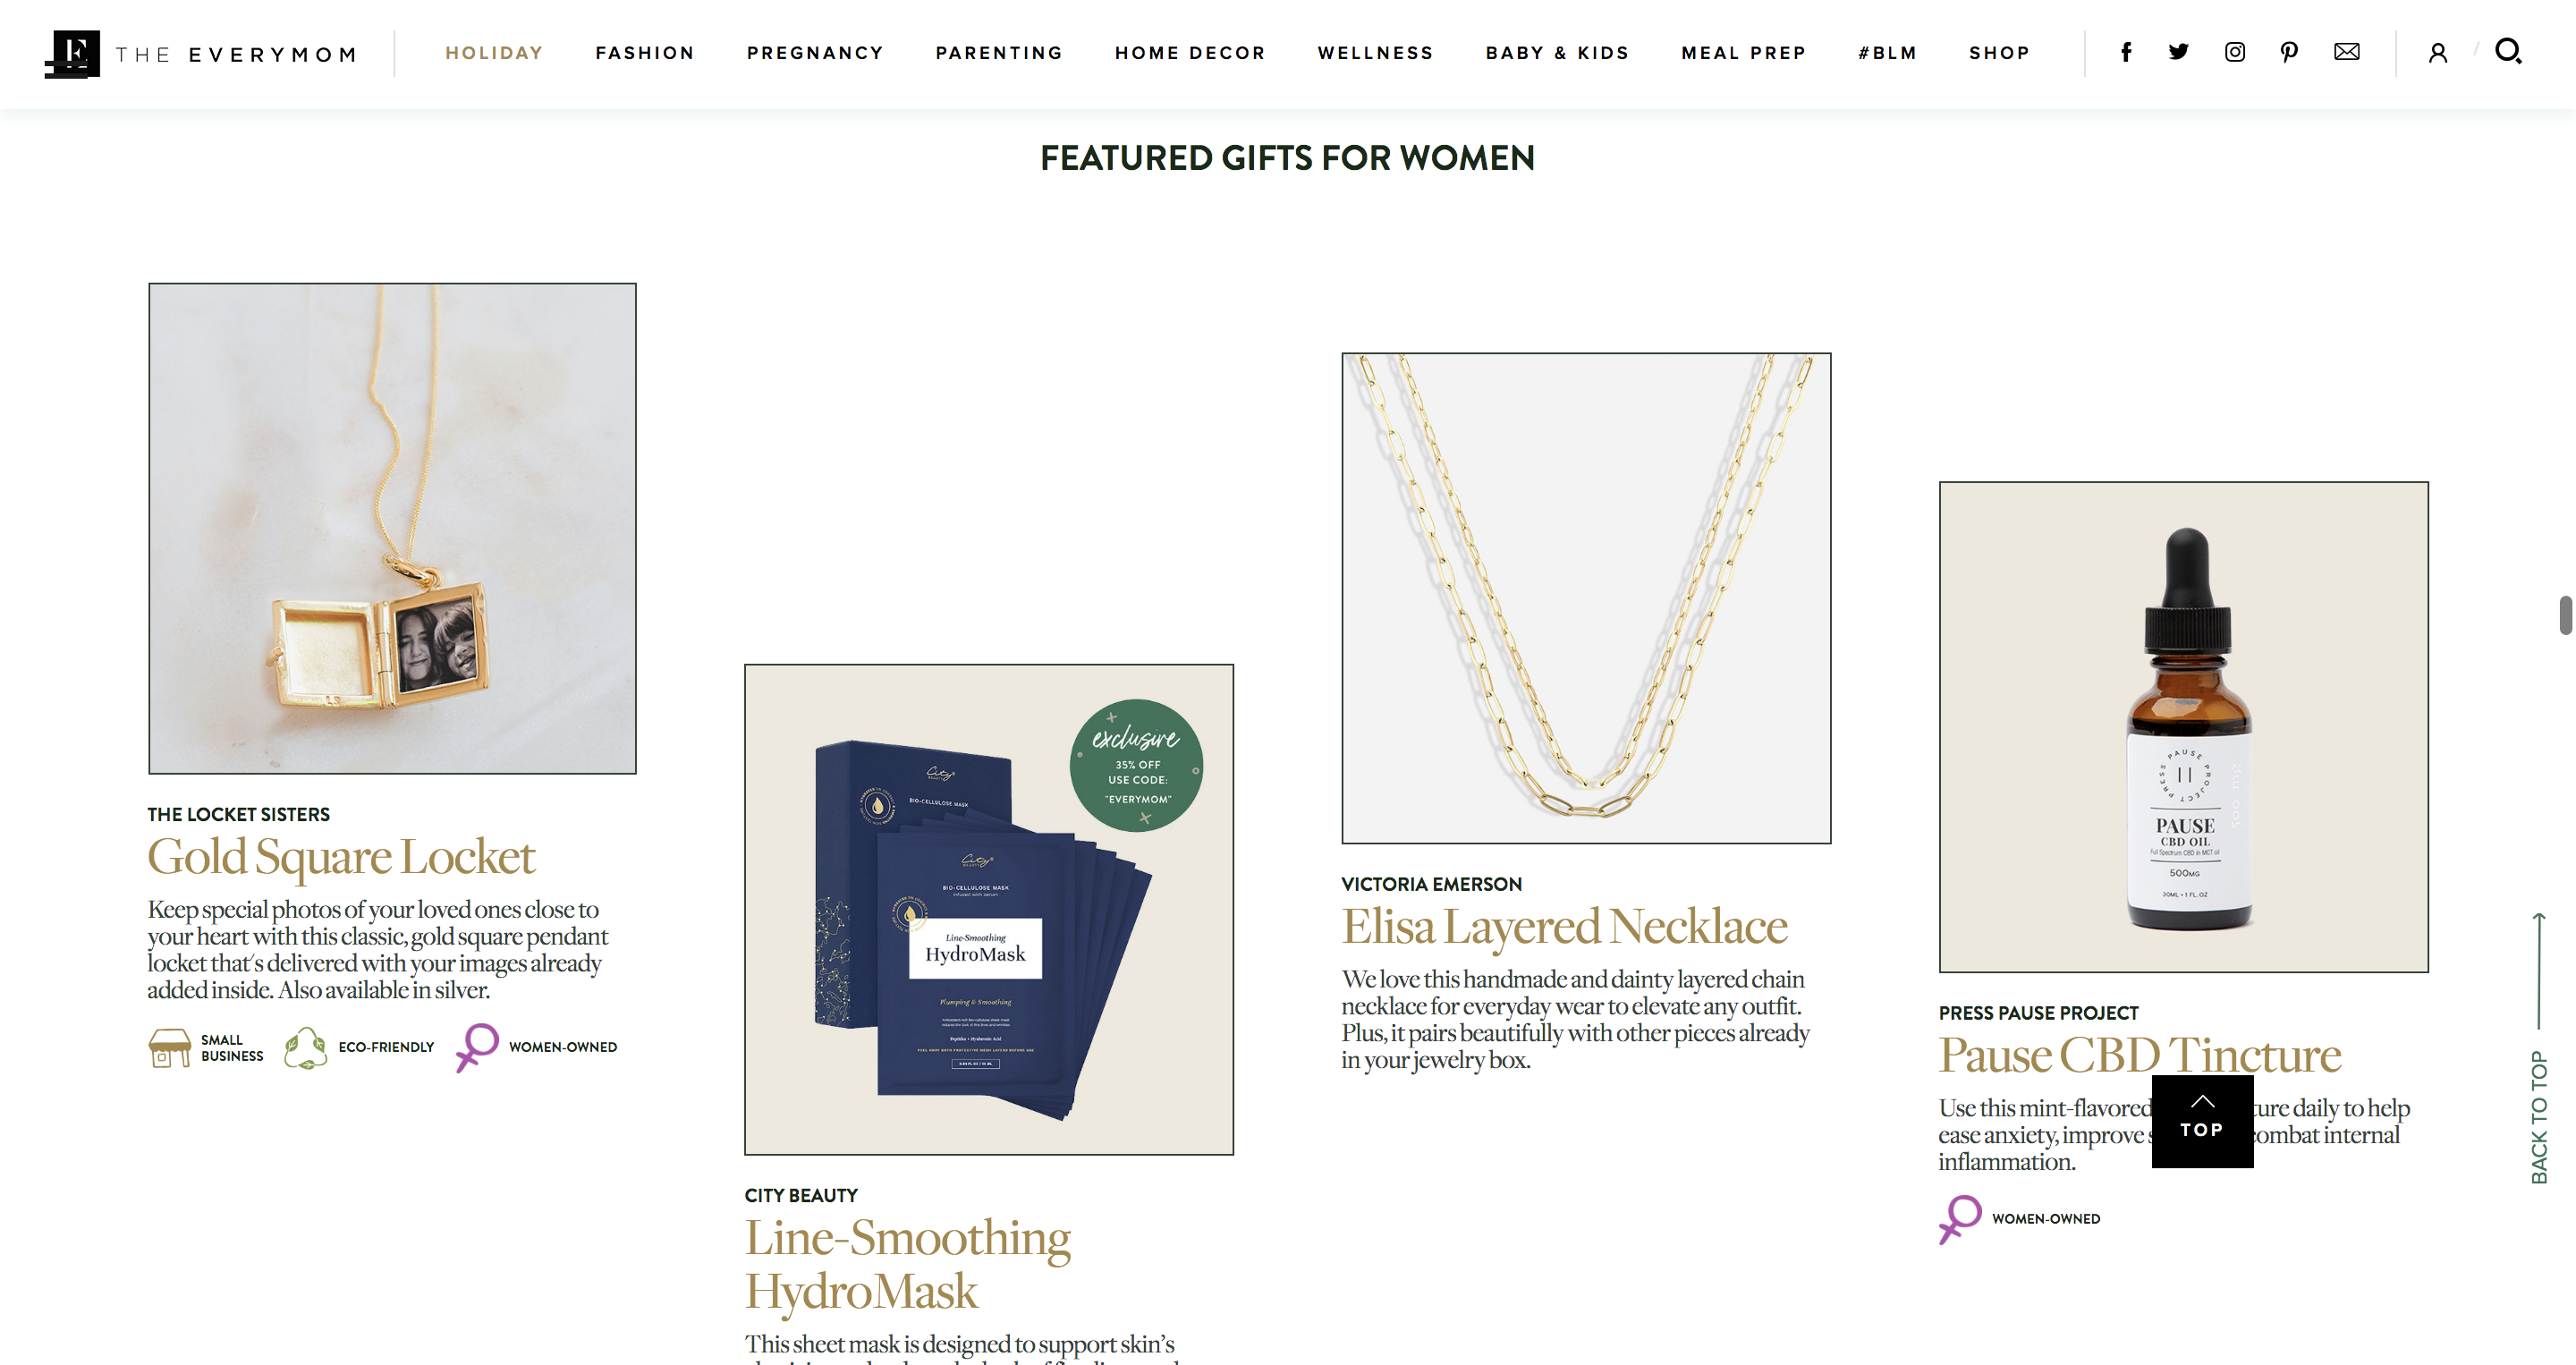 The Every Mom featured The Locket Sisters in their 2021 holiday gift guide